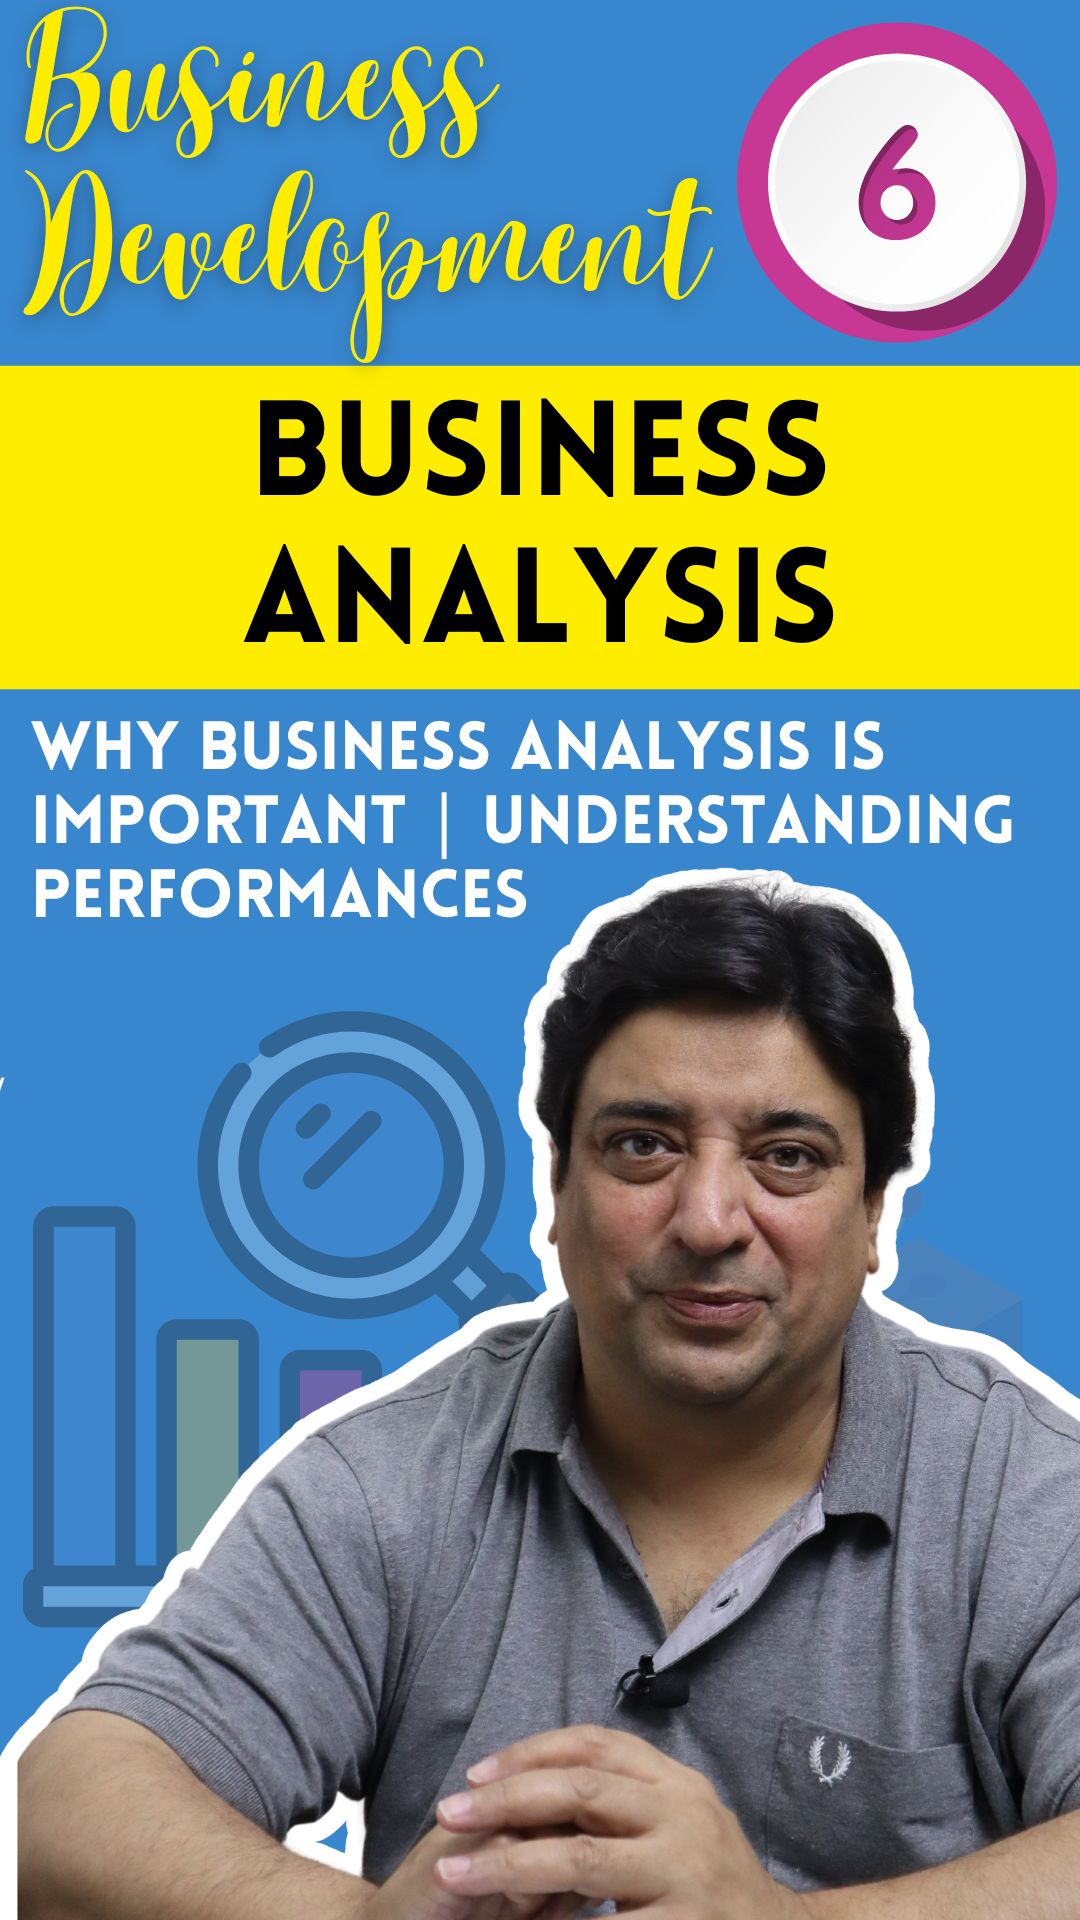 Why business analysis is important Understanding performances